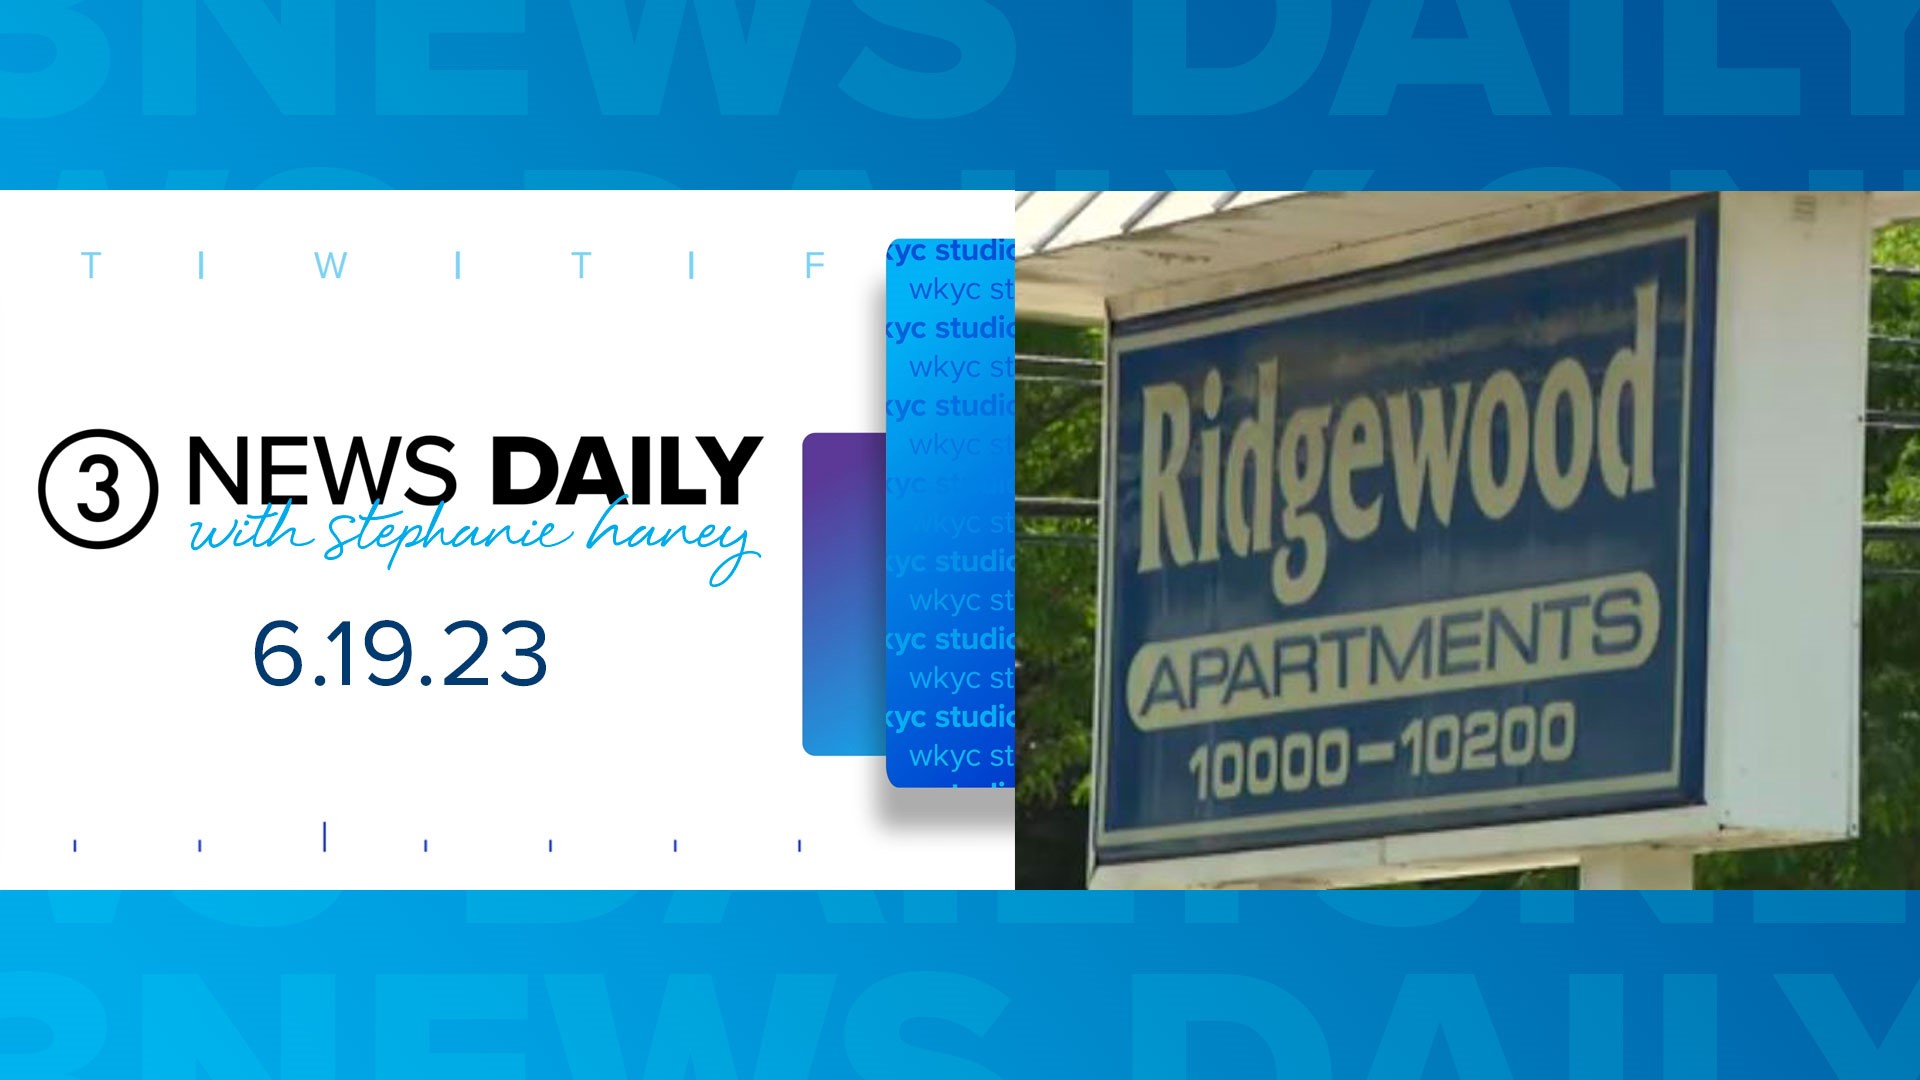 New on 3, get the latest information on what's happening and impacting you across Northeast Ohio on Monday, June 19, 2023, on 3News Daily with Stephanie Haney